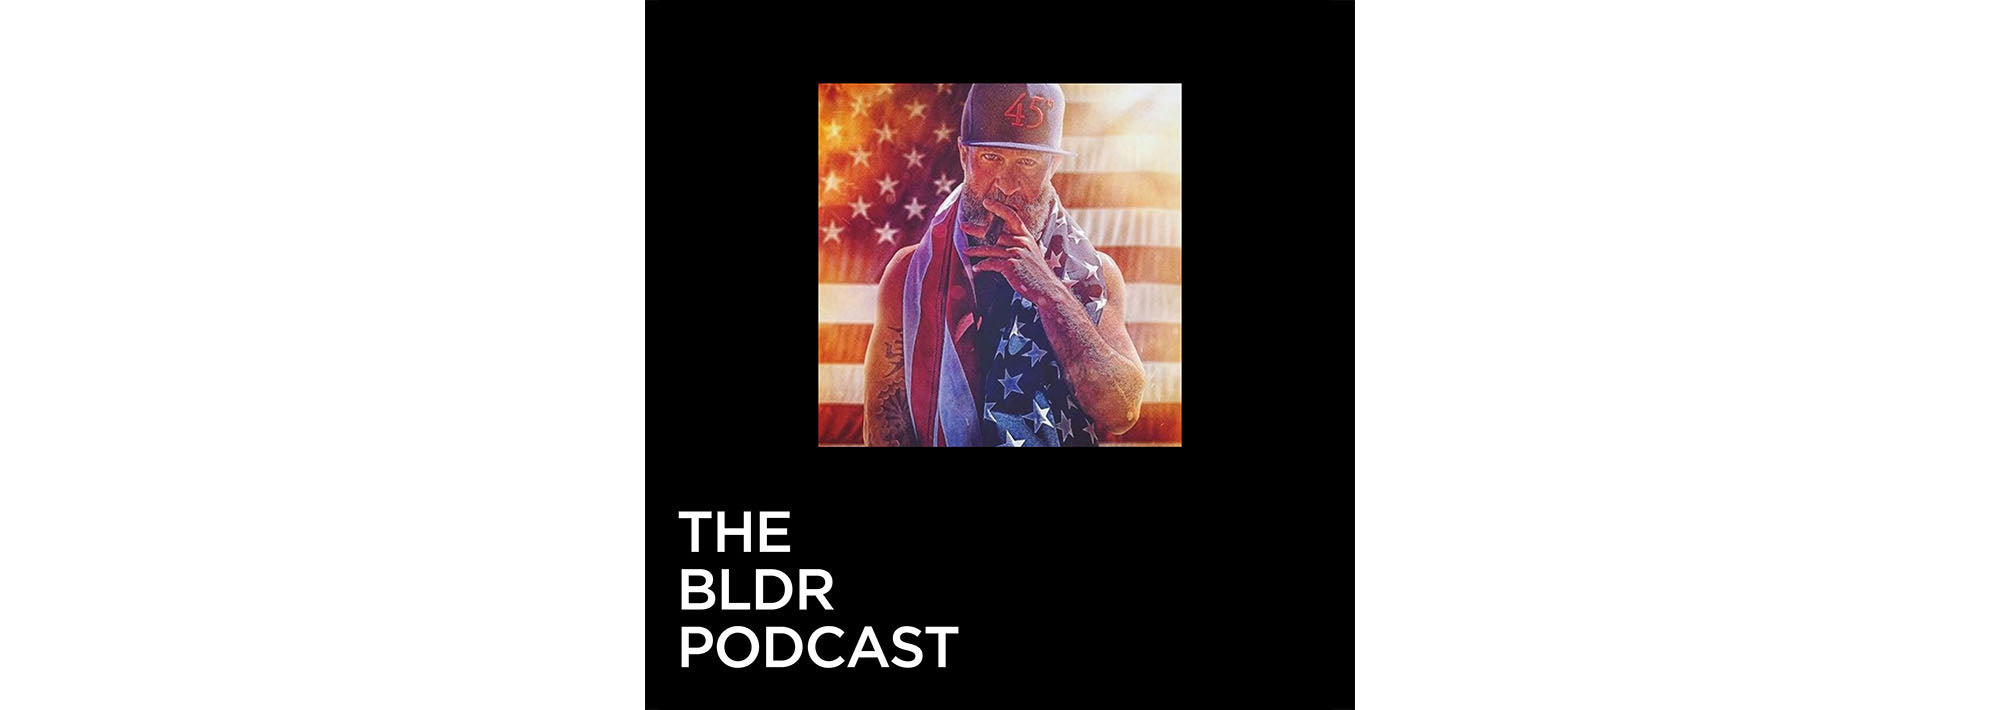 BLDR Podcast- Sean Whalen "What do you want?"